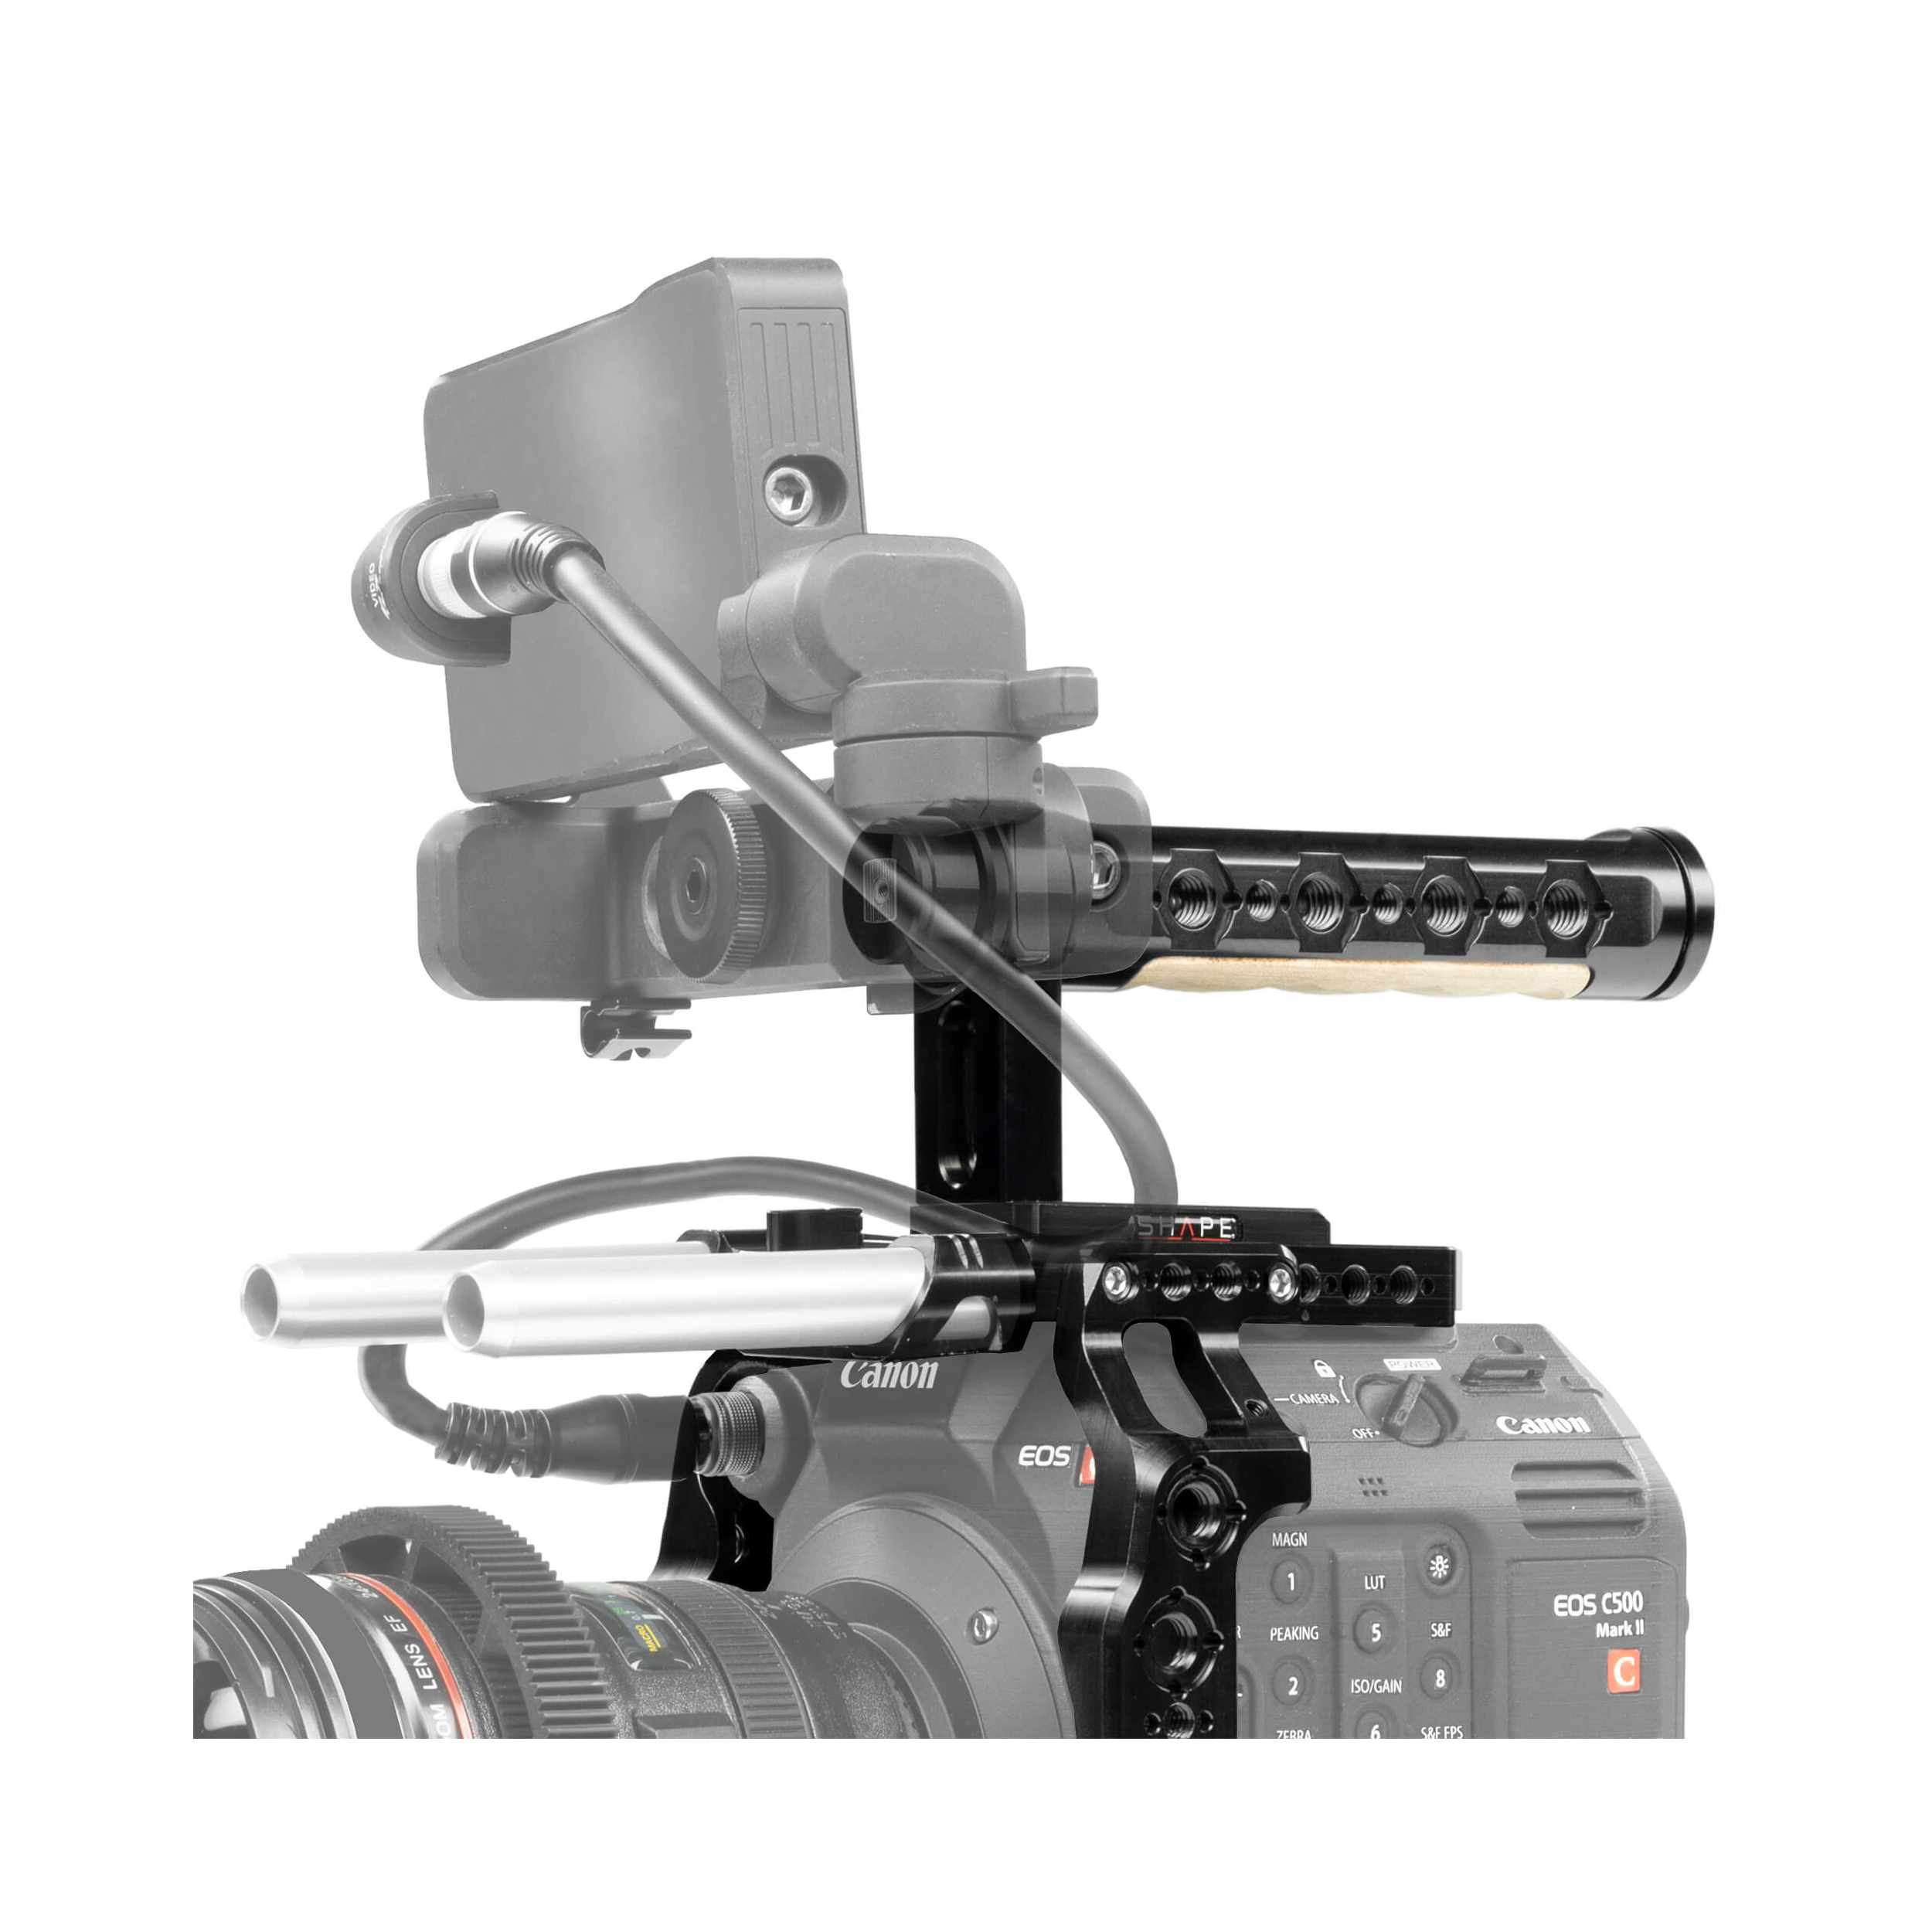 SHAPE Viewfinder Adapter with 3/8"-16 ARRI-Style Accessory Mount